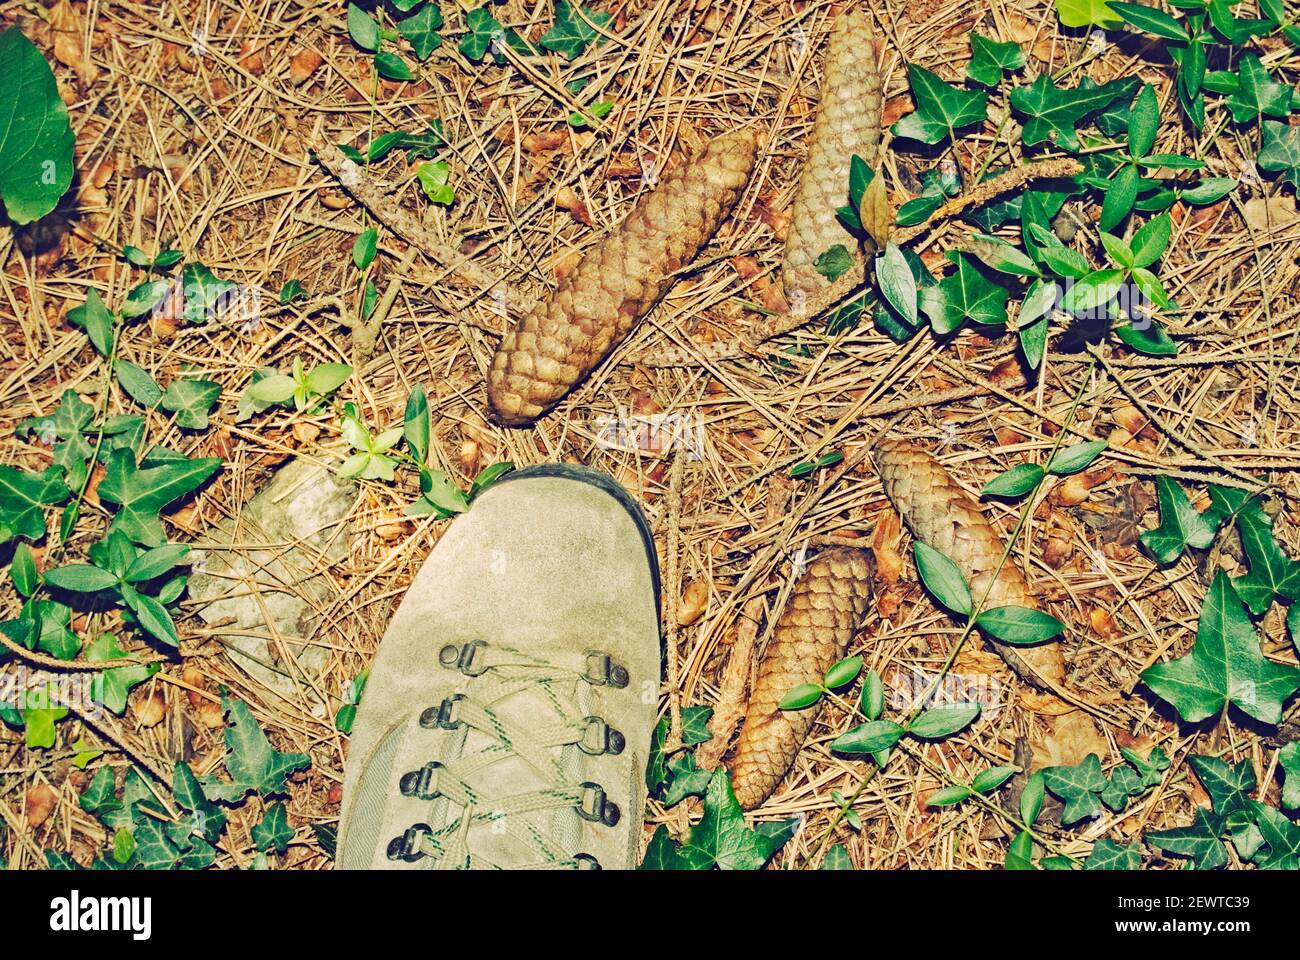 hiking boot against a pine needles covered forest floor with pine cones Stock Photo